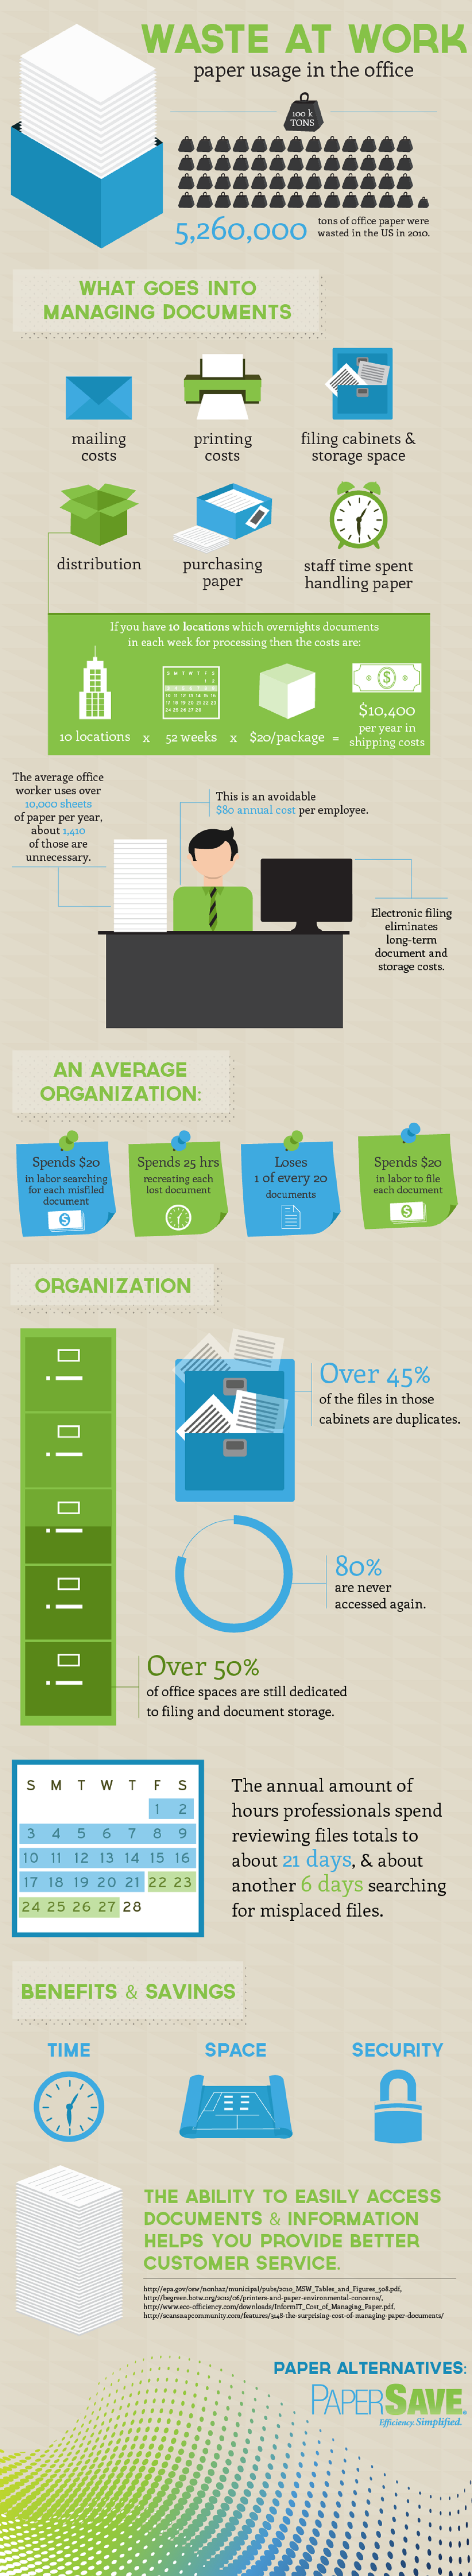 waste-at-work-paper-usage-in-the-office-infographic